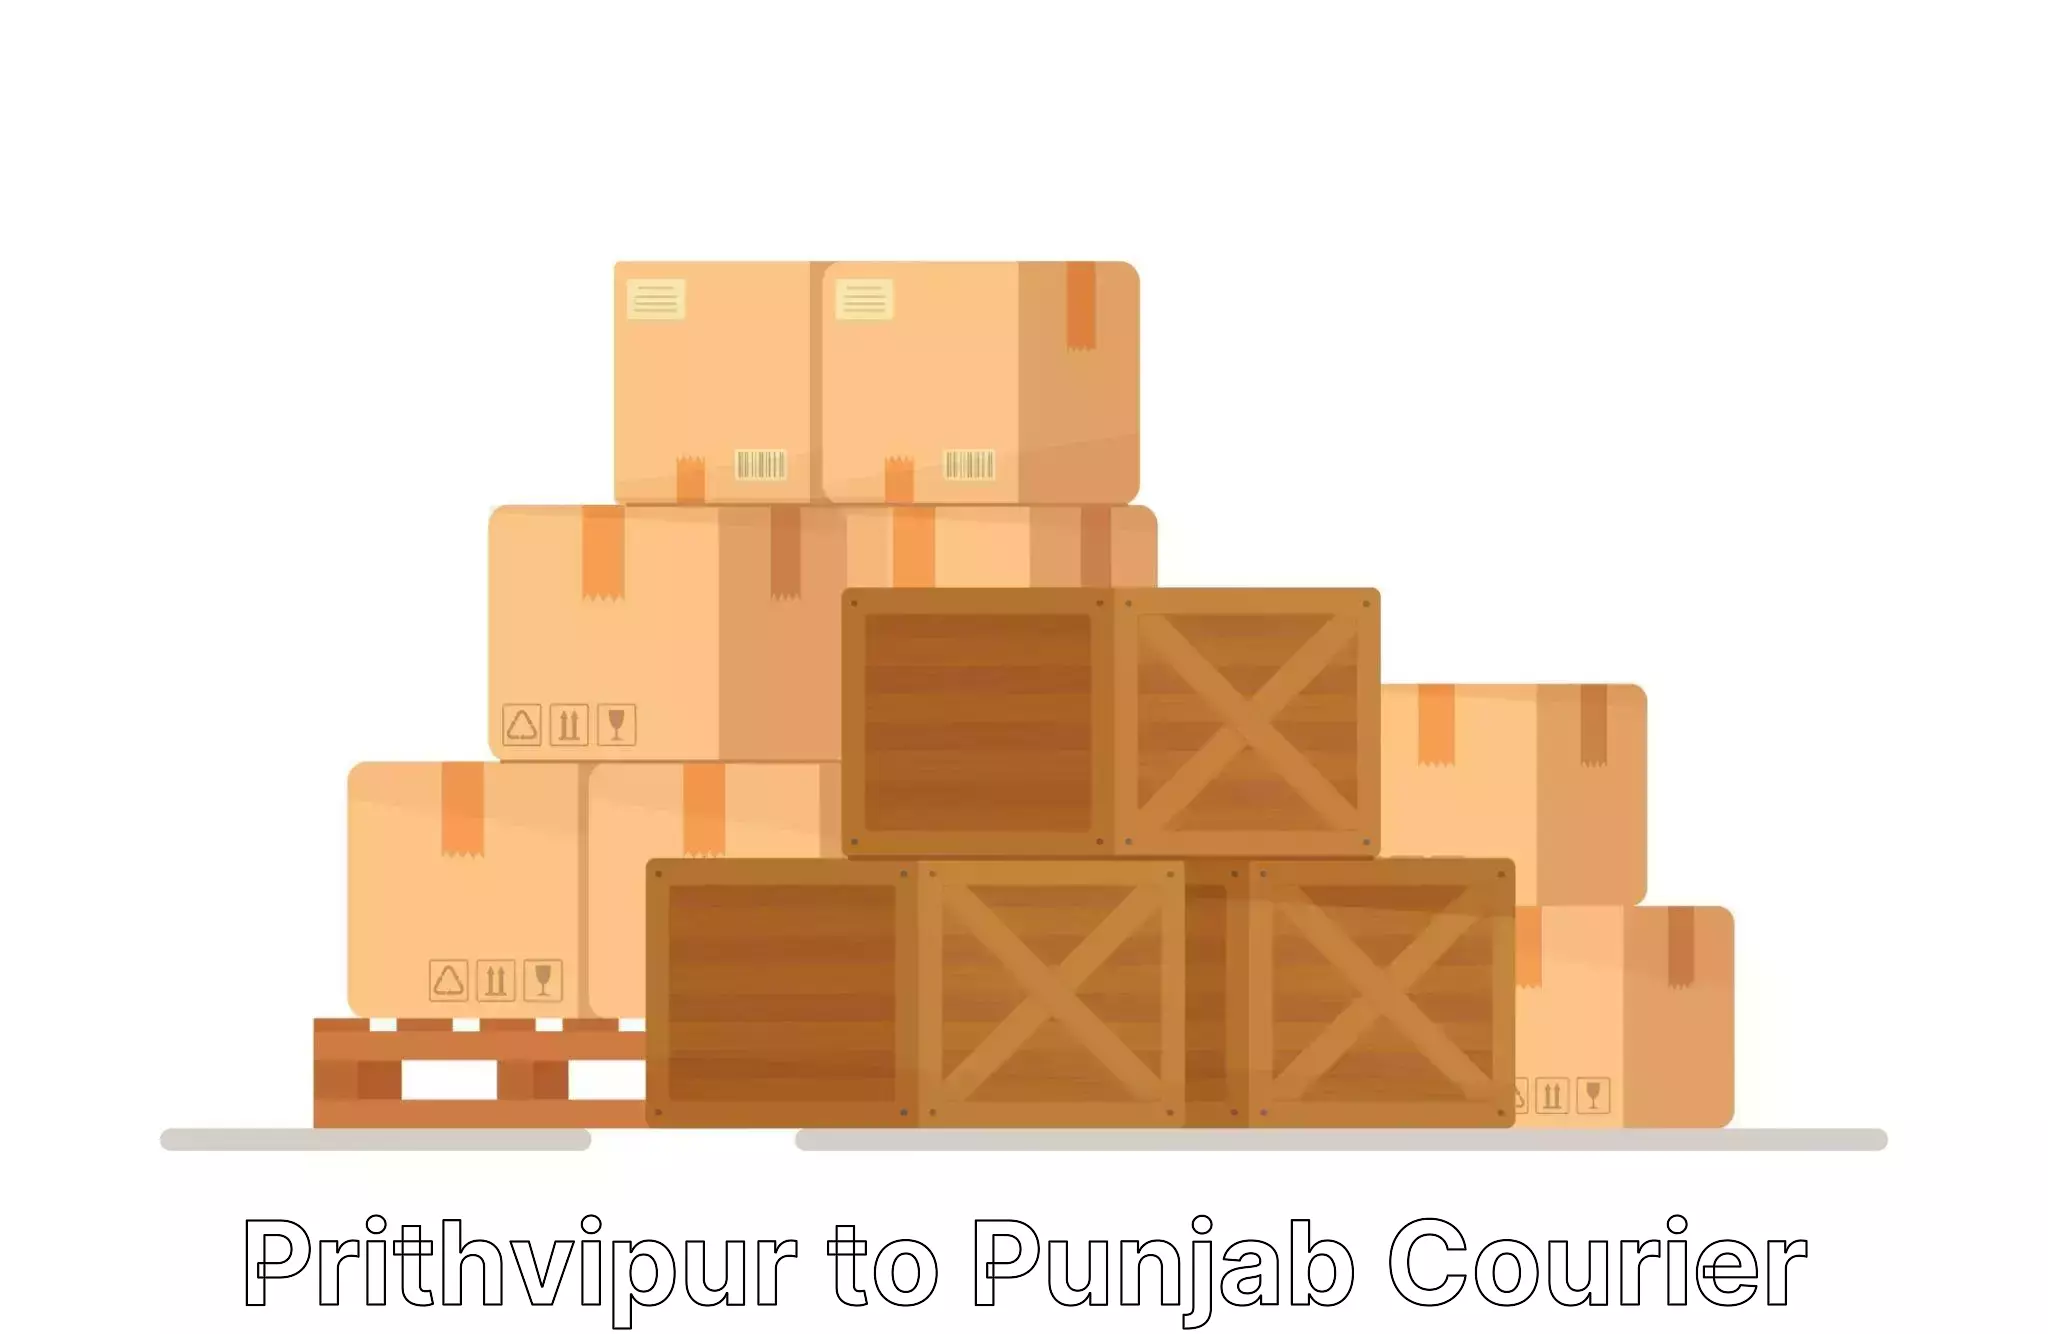 Furniture transport specialists Prithvipur to Nangal